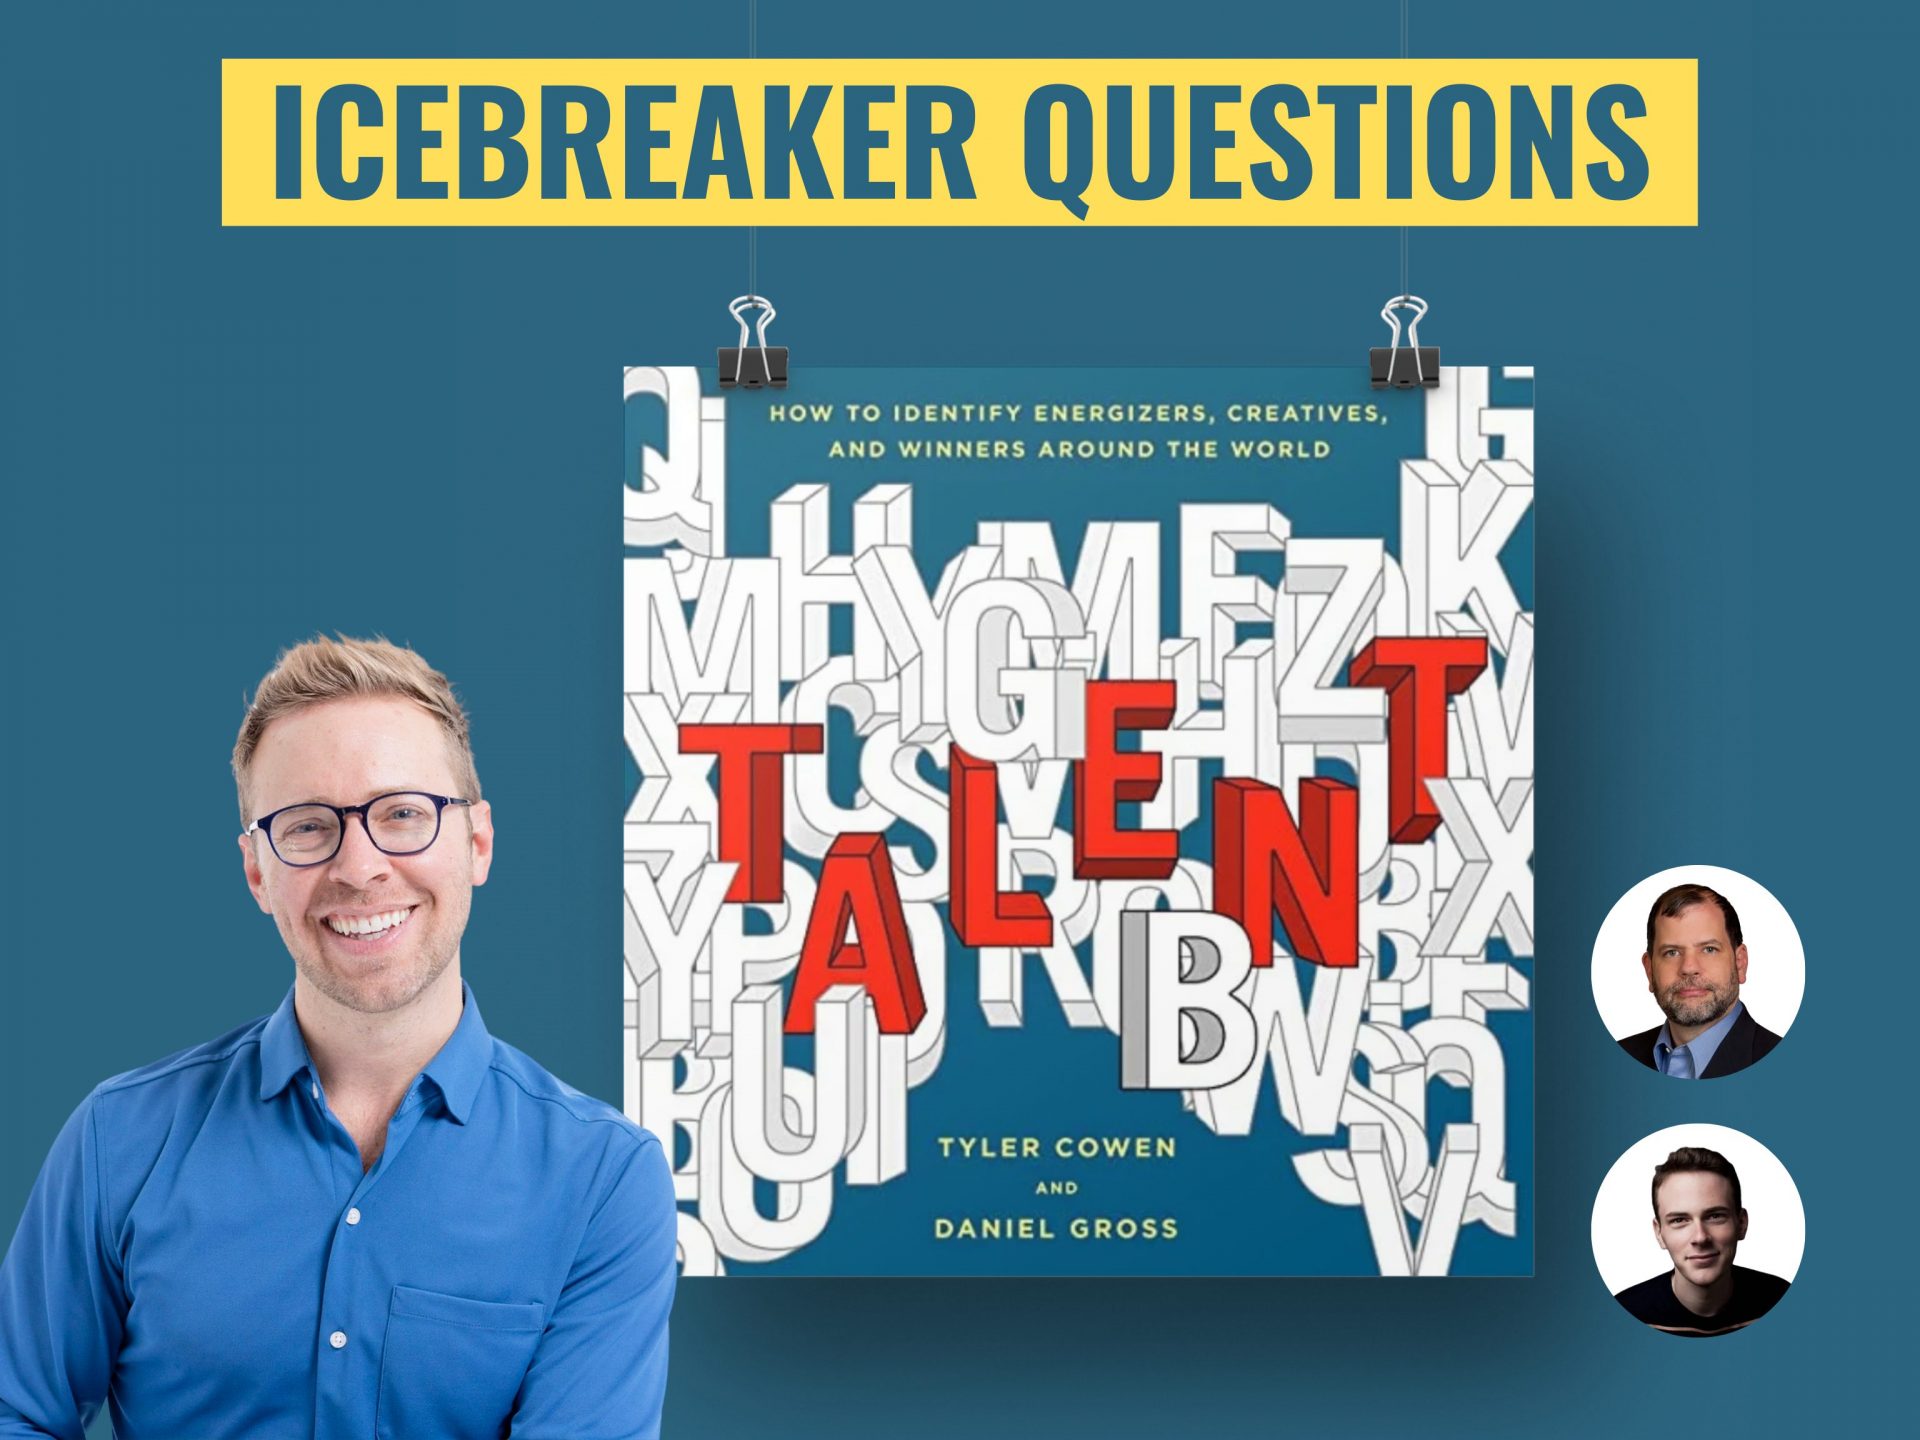 36 Icebreaker Questions for Work in 2023